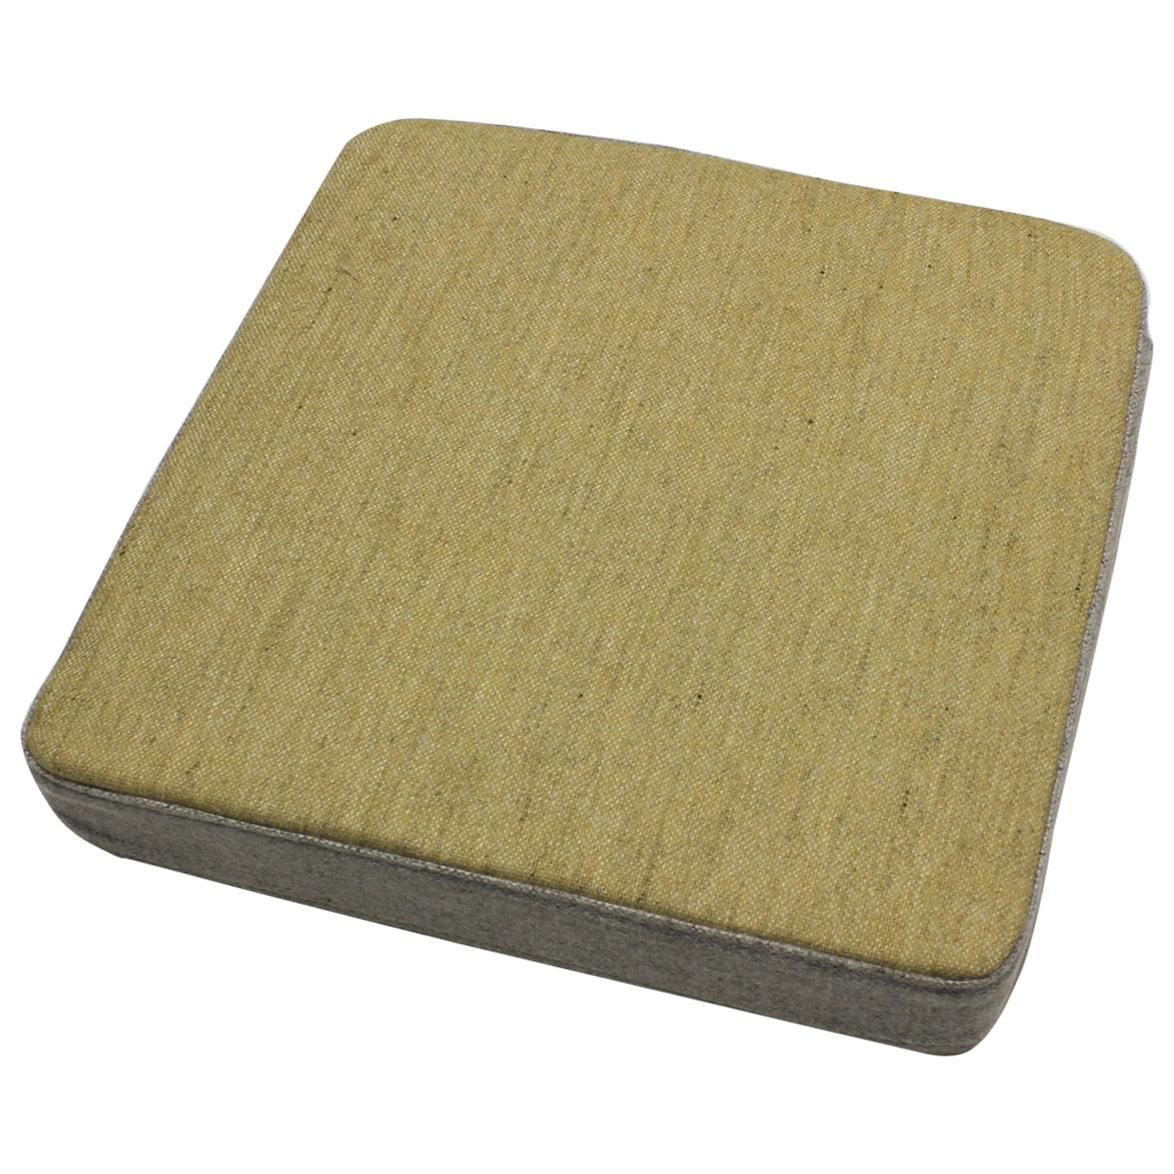 OPE, Ope Select, Cushion / Sound Absorber, Tan im Angebot